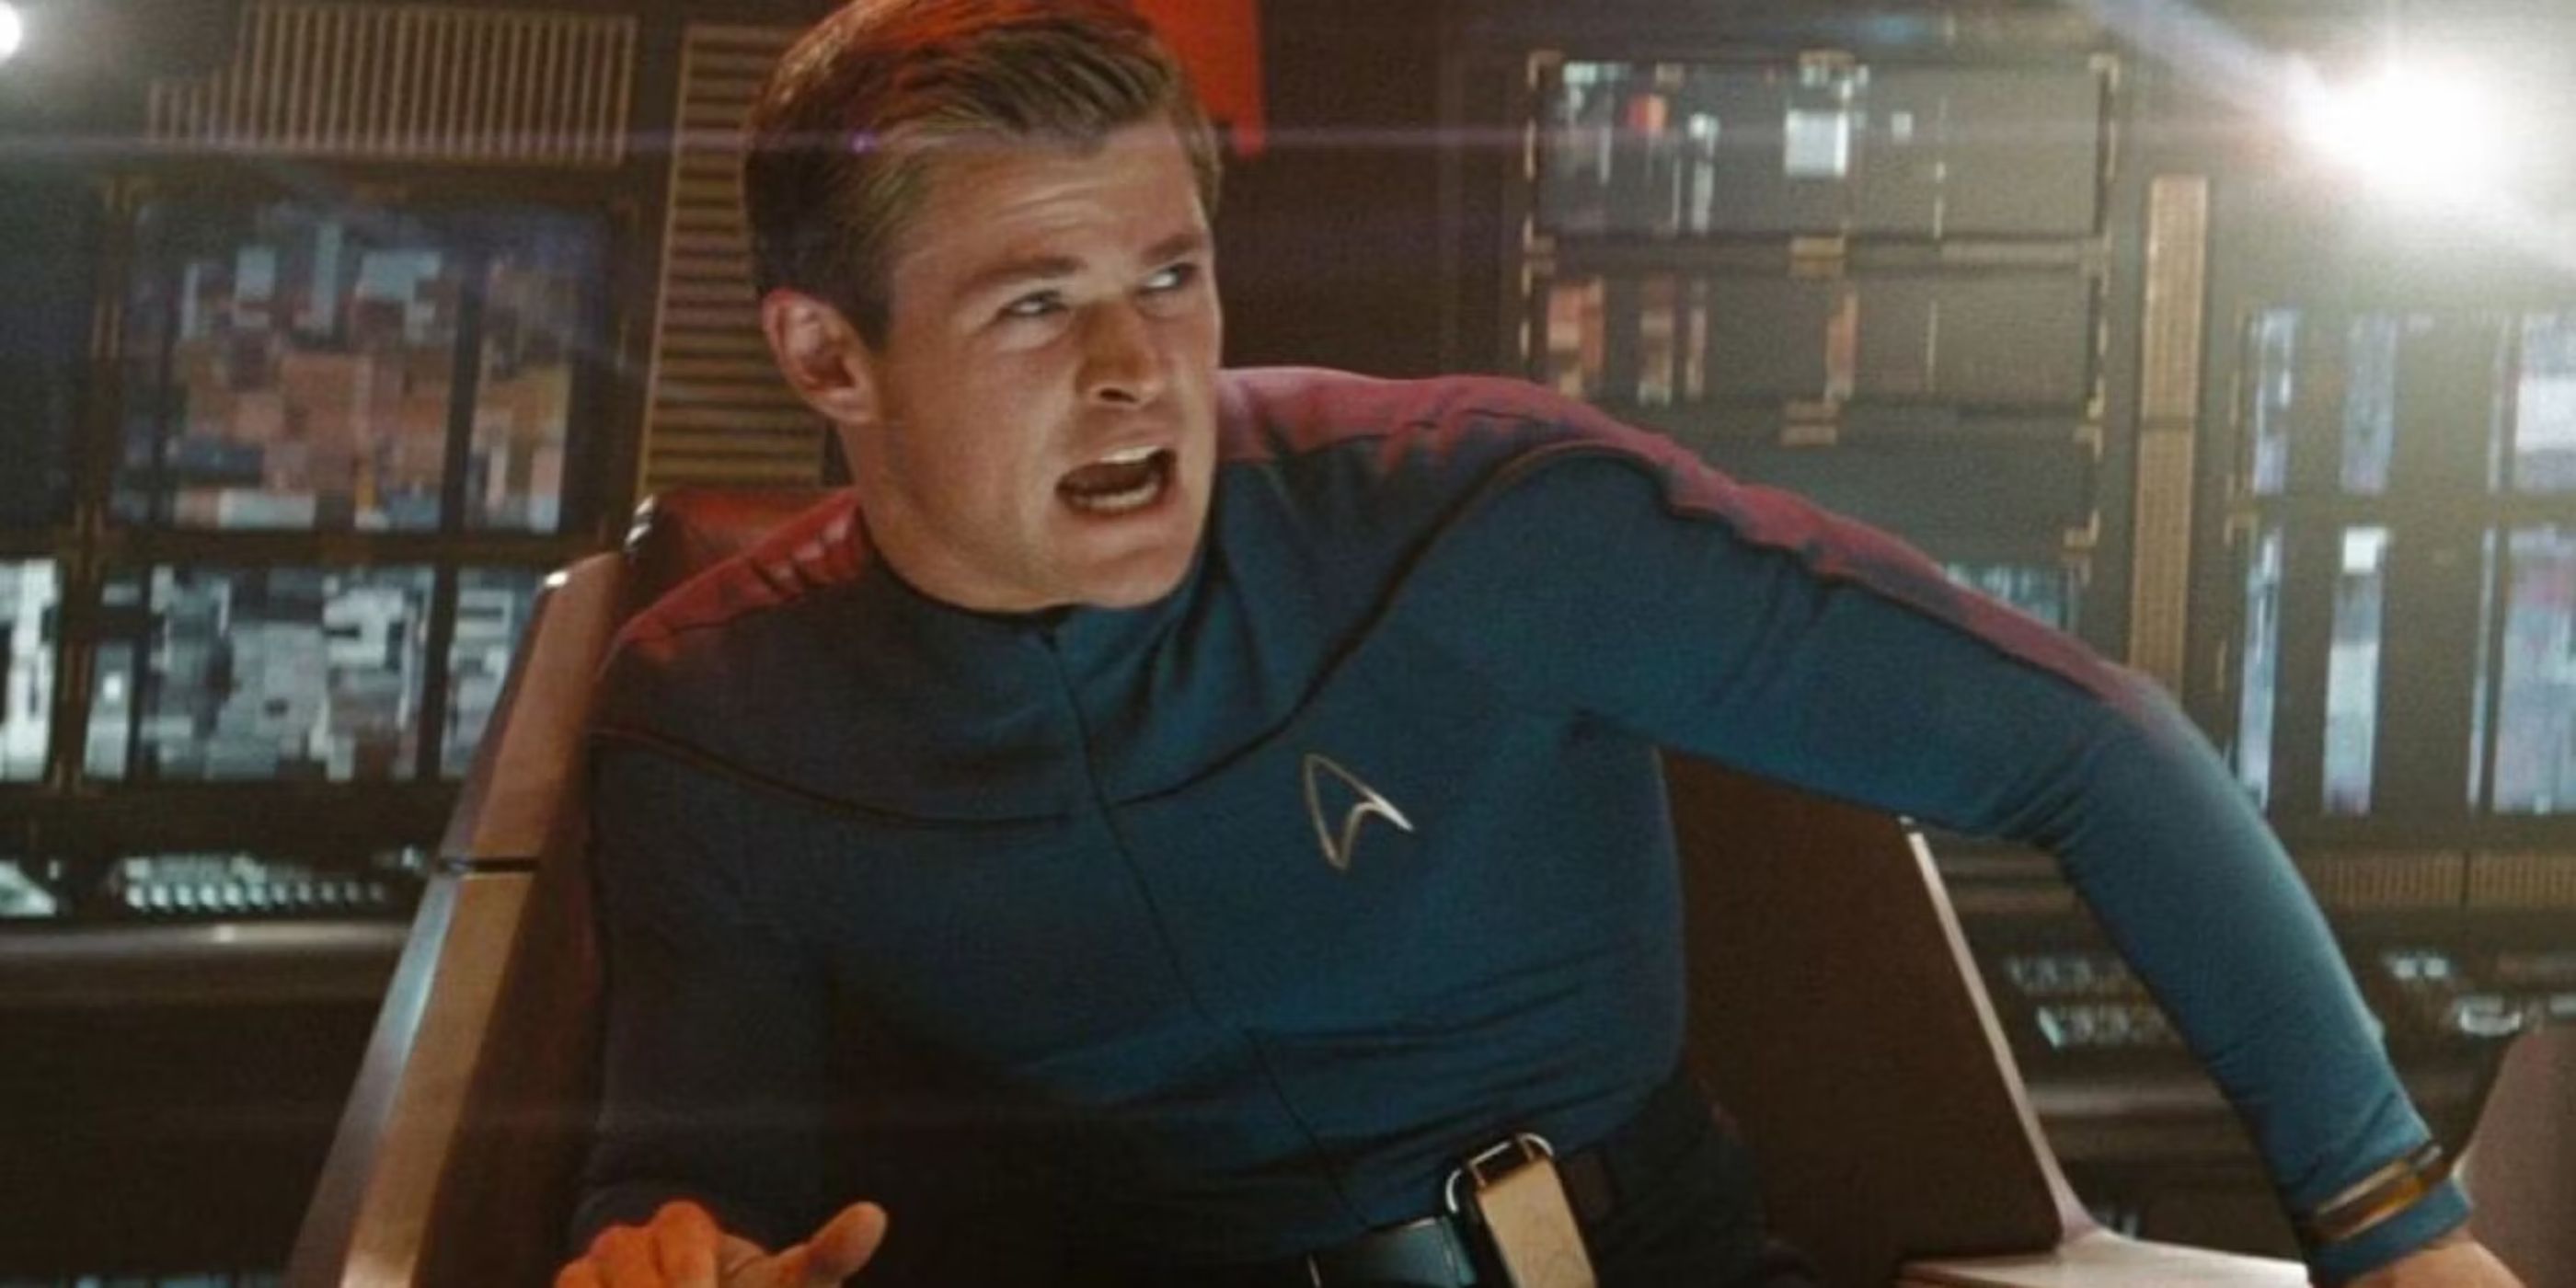 Captain George Kirk (Chris Hemsworth) sits in his chair commanding his ship which is under attack in 'Star Trek' (2009).